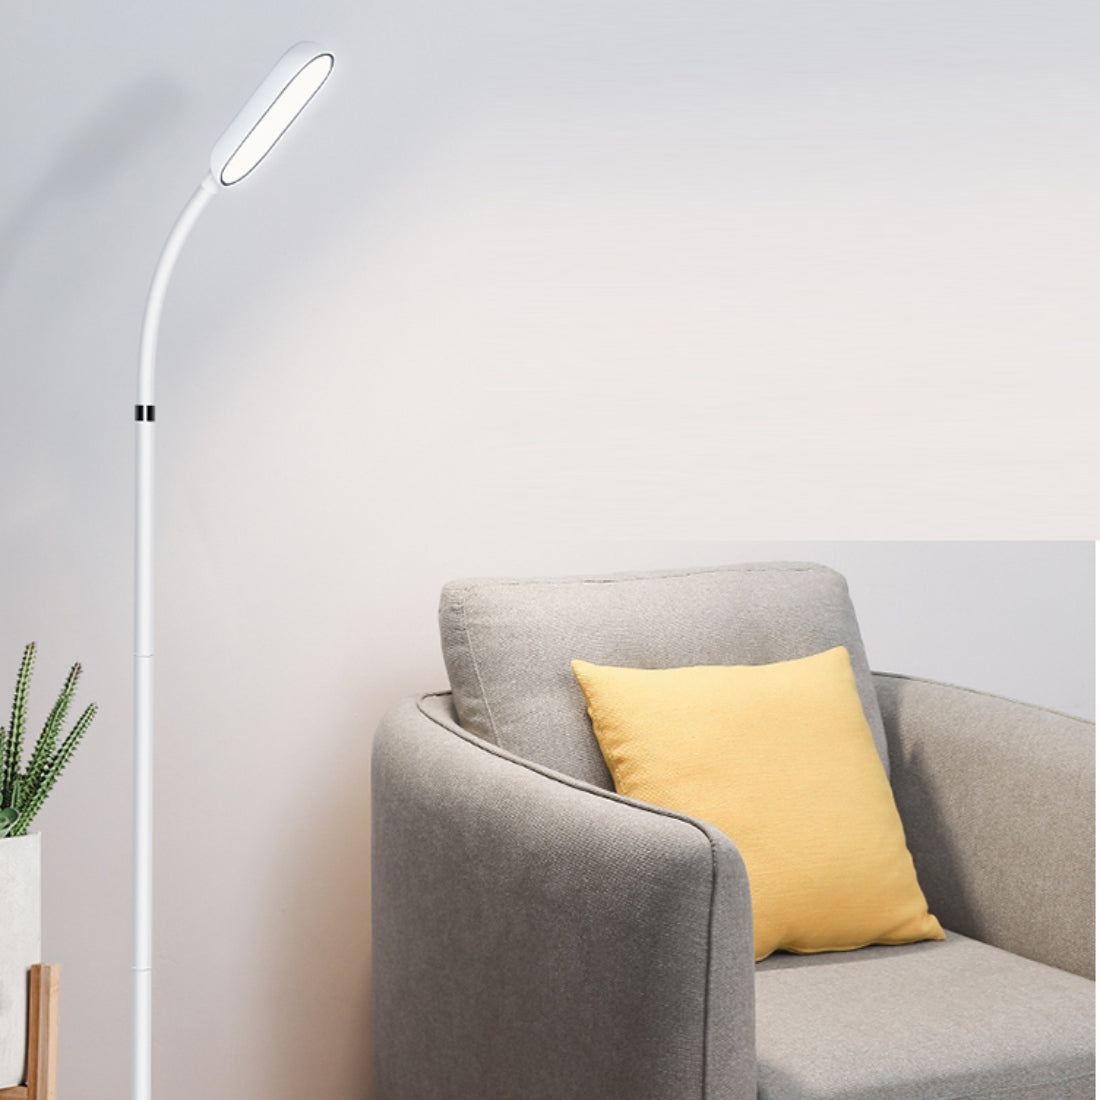 LUMOS LED Rechargeable Battery Operated Reading Floor Lamp